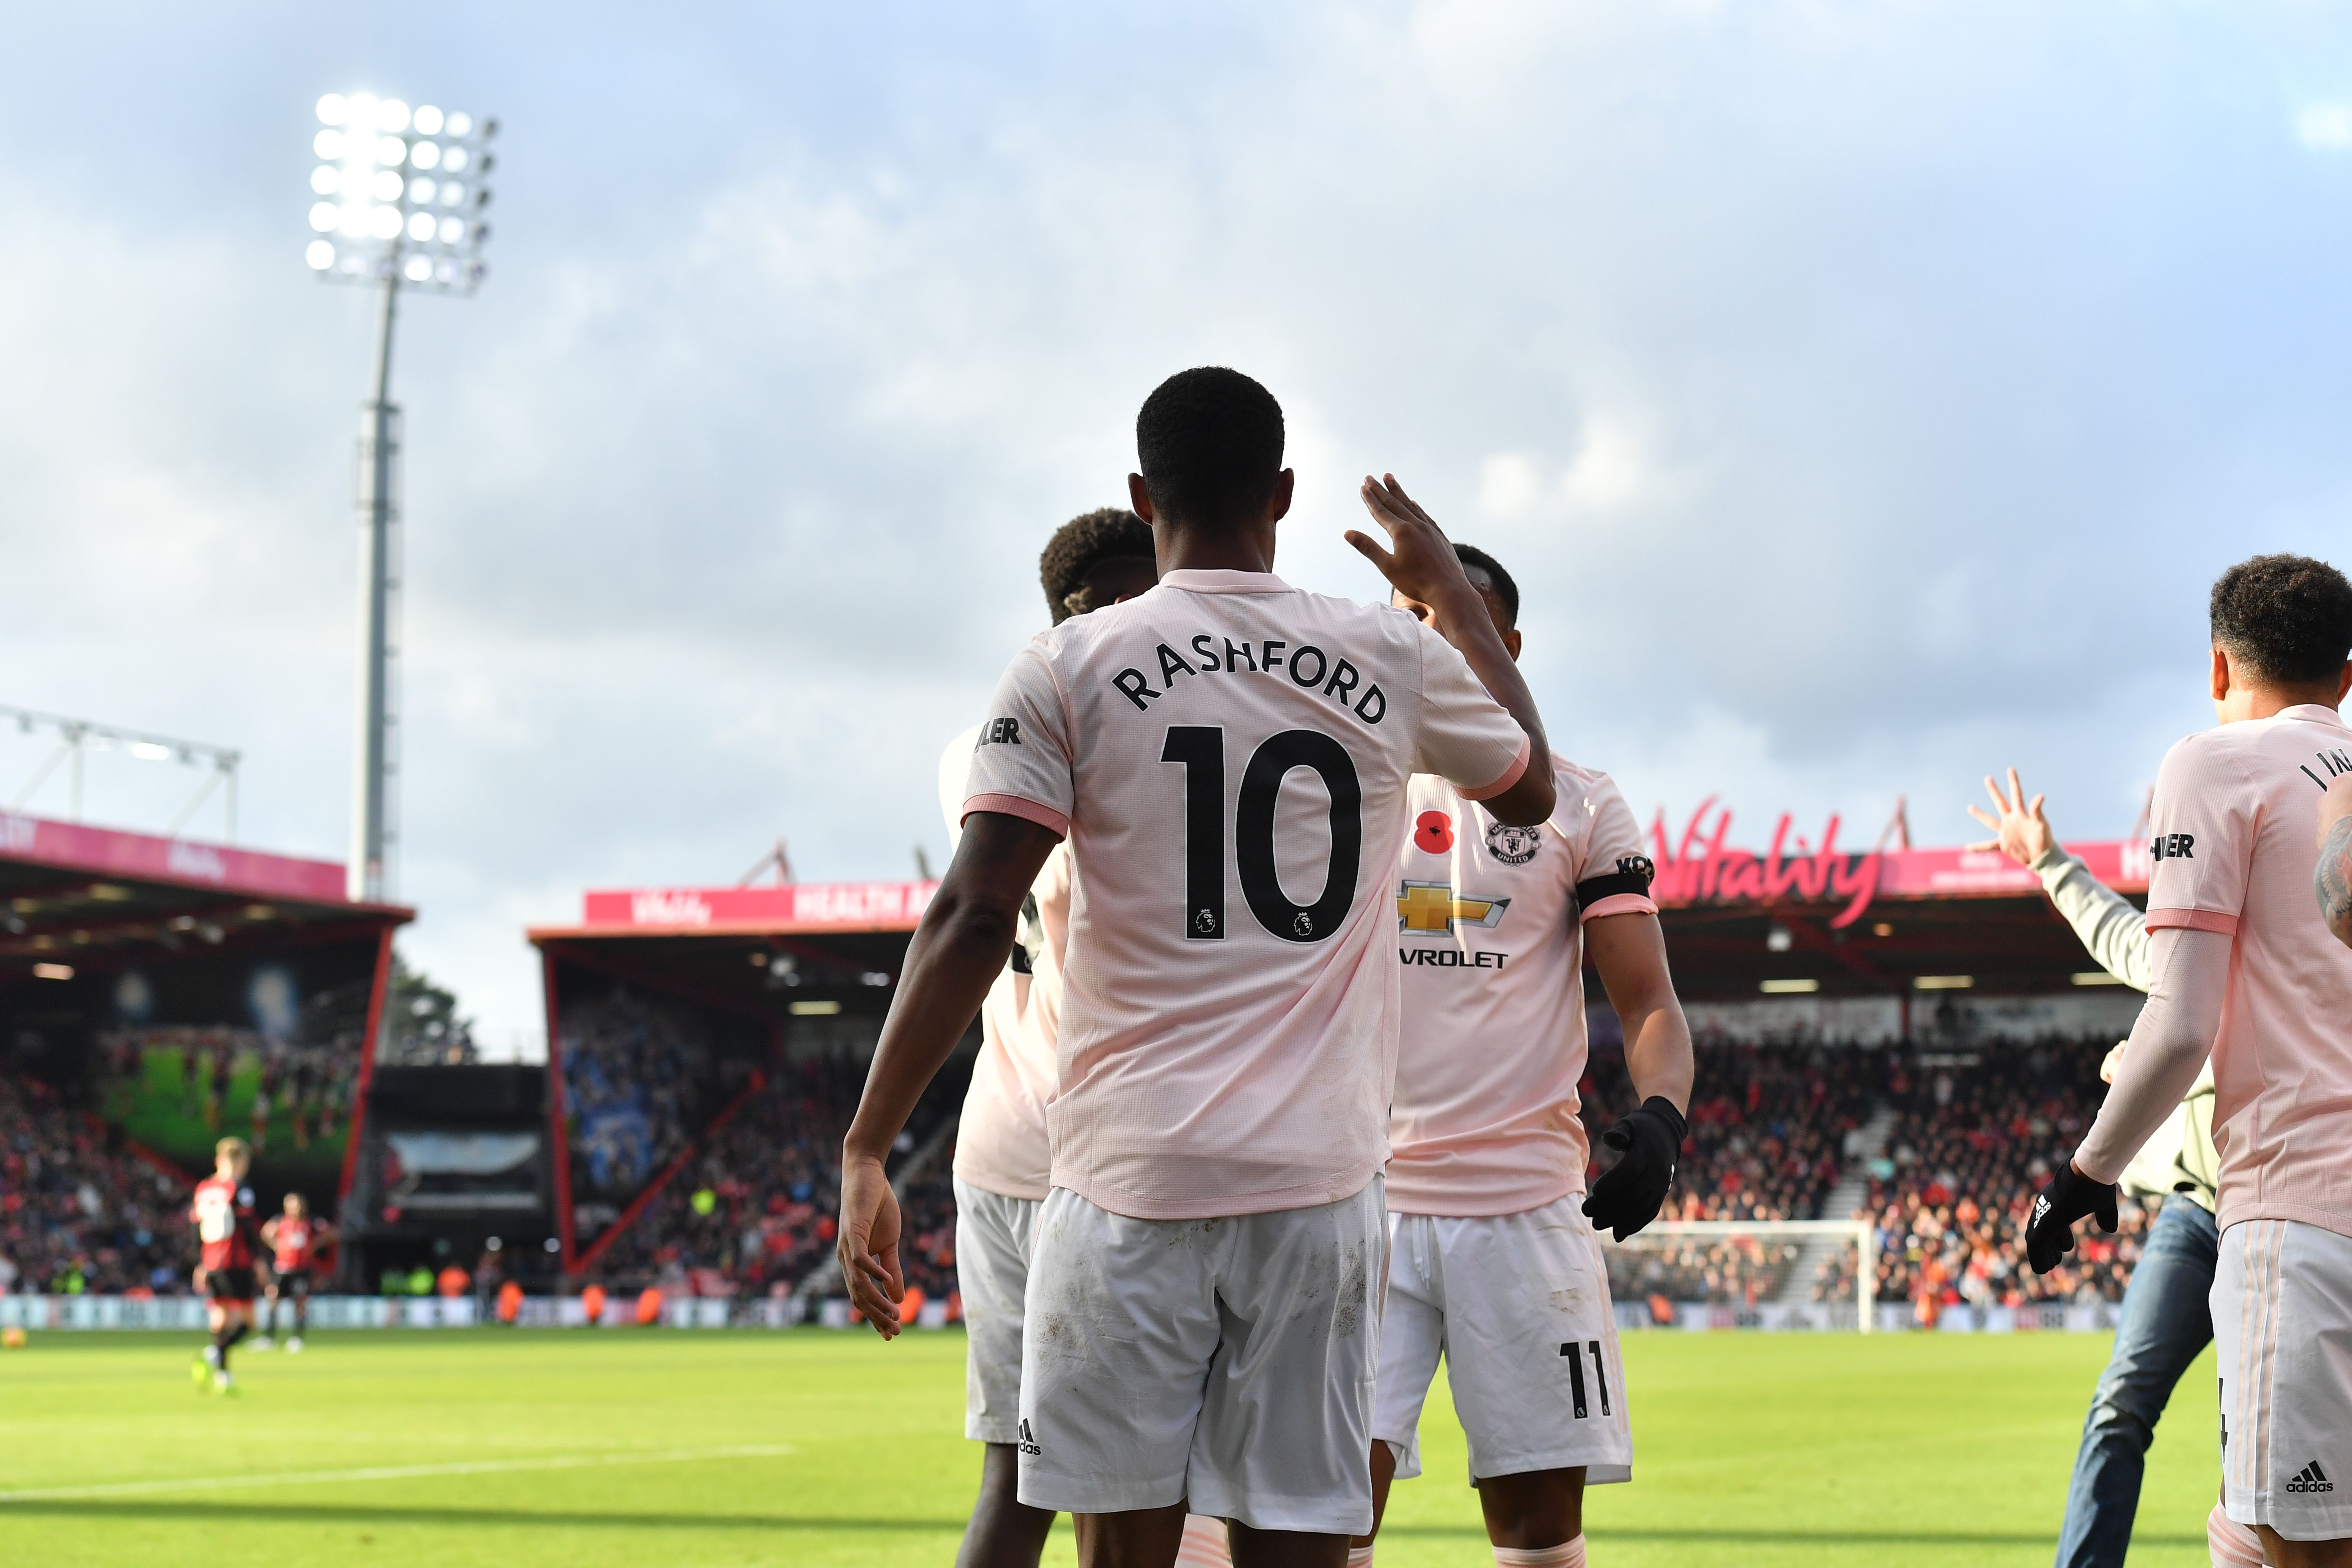 Manchester United's English striker Marcus Rashford (C) celebrates scoring his team's second goal during the English Premier League football match between Bournemouth and Manchester United at the Vitality Stadium in Bournemouth, southern England on November 3, 2018. (Photo by Ben STANSALL / AFP) / RESTRICTED TO EDITORIAL USE. No use with unauthorized audio, video, data, fixture lists, club/league logos or 'live' services. Online in-match use limited to 120 images. An additional 40 images may be used in extra time. No video emulation. Social media in-match use limited to 120 images. An additional 40 images may be used in extra time. No use in betting publications, games or single club/league/player publications. /         (Photo credit should read BEN STANSALL/AFP/Getty Images)